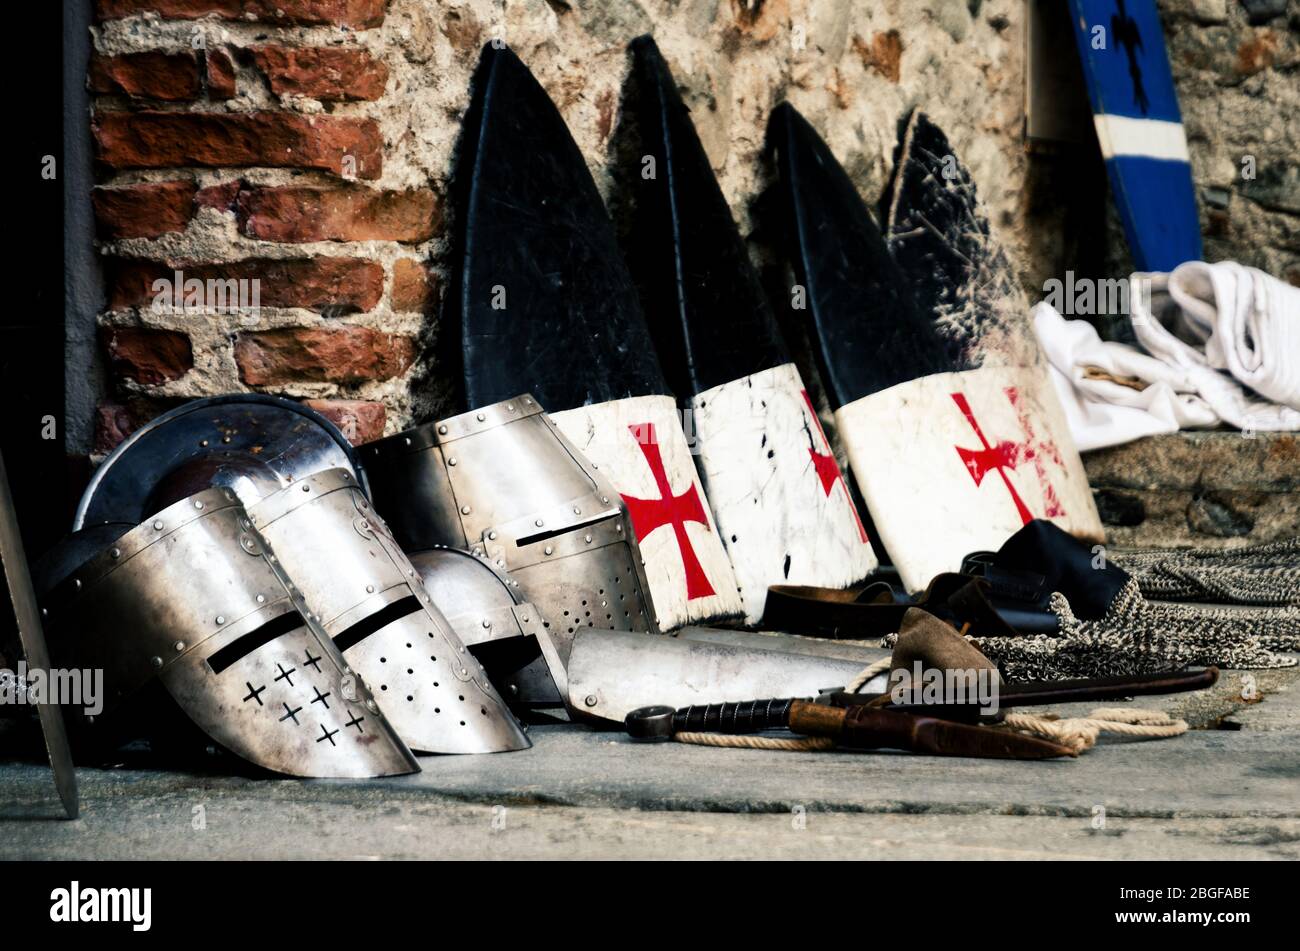 Medieval weapons, shields and helmets from the crusade age on a castle floor during an historical reenactment Stock Photo